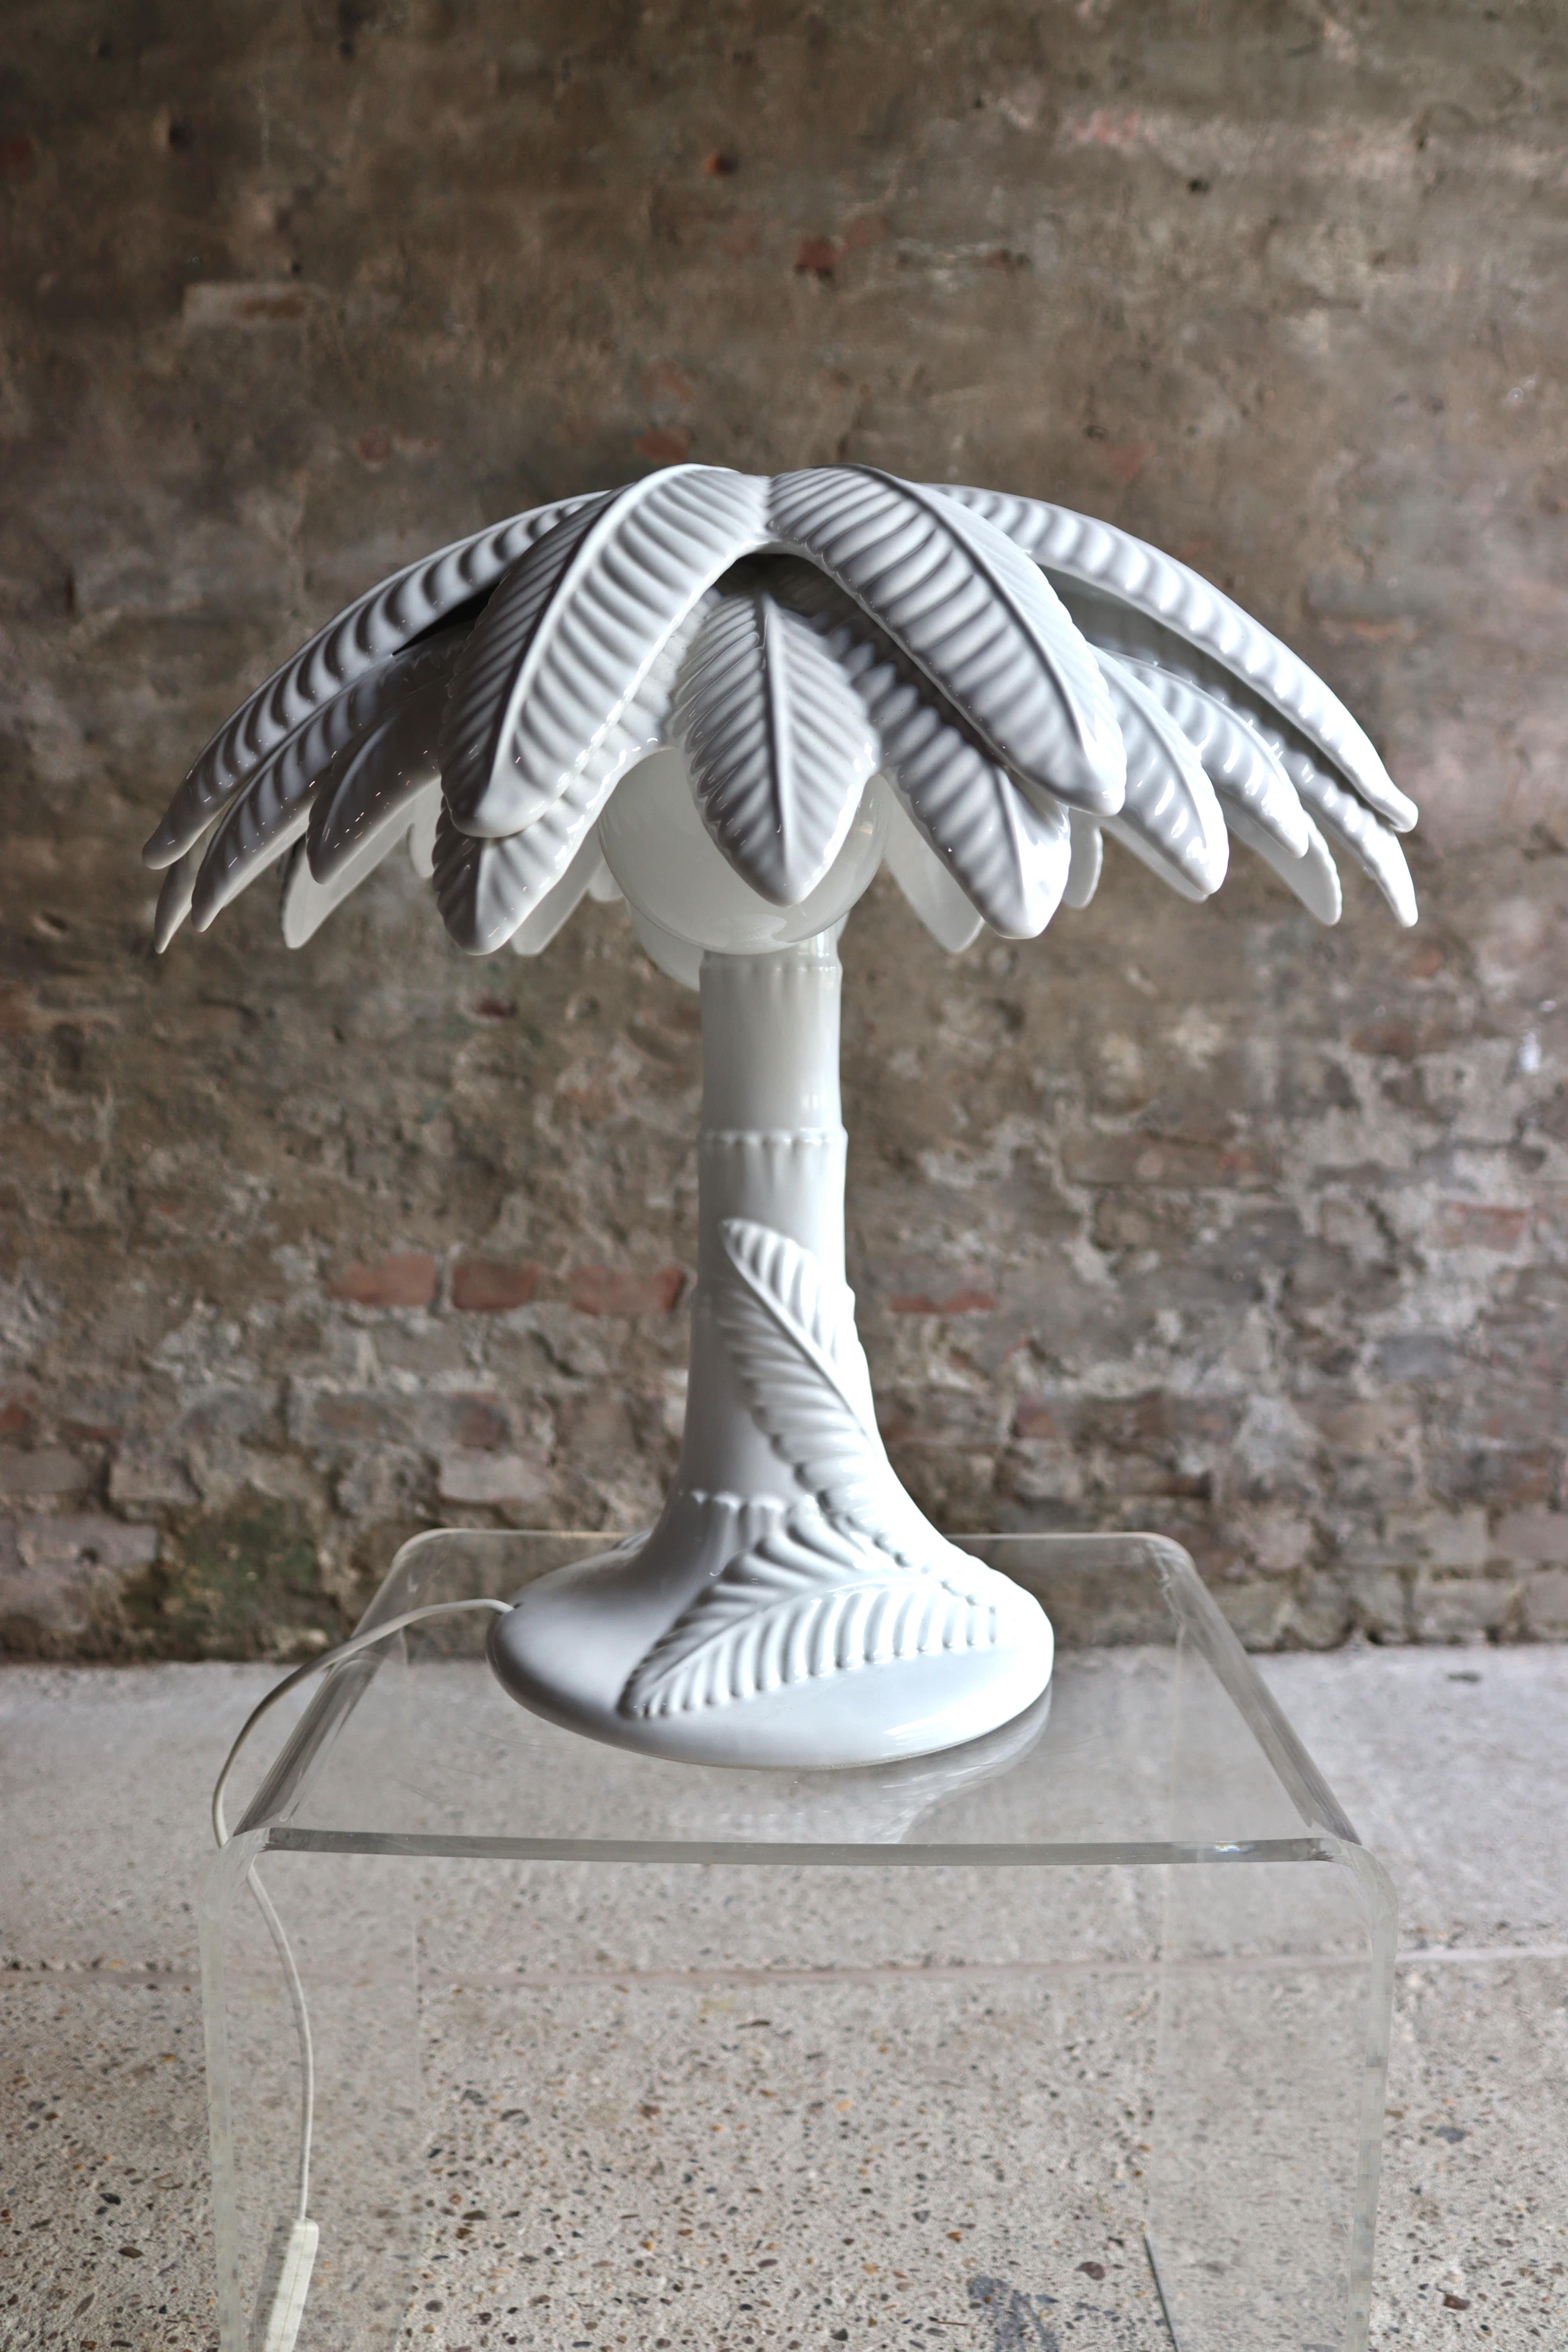 This really cool white palm tree lamp has a ceramic base and metal leaves. The lamp has 2 light sources and has a “made in Italy” stamp underneath. Probably made in the 1970s. It has been rewired at some point so it’s safe for use.